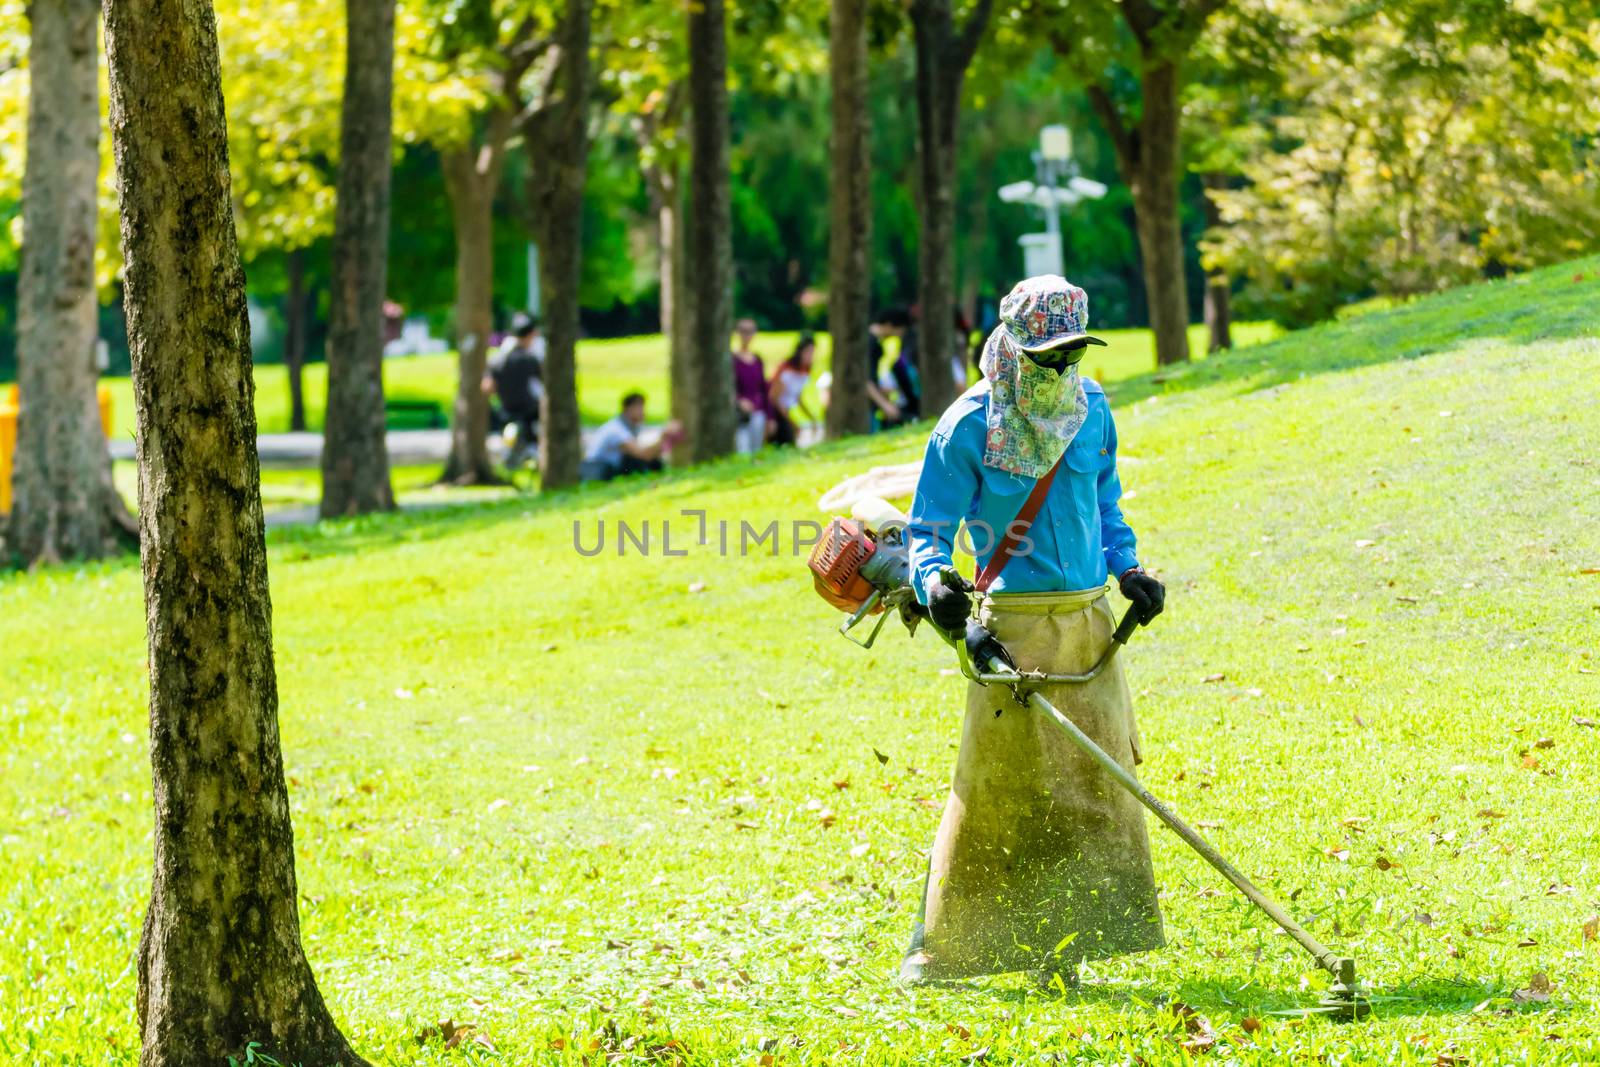 lawn mower worker man cutting grass in green field park by pitchaphan